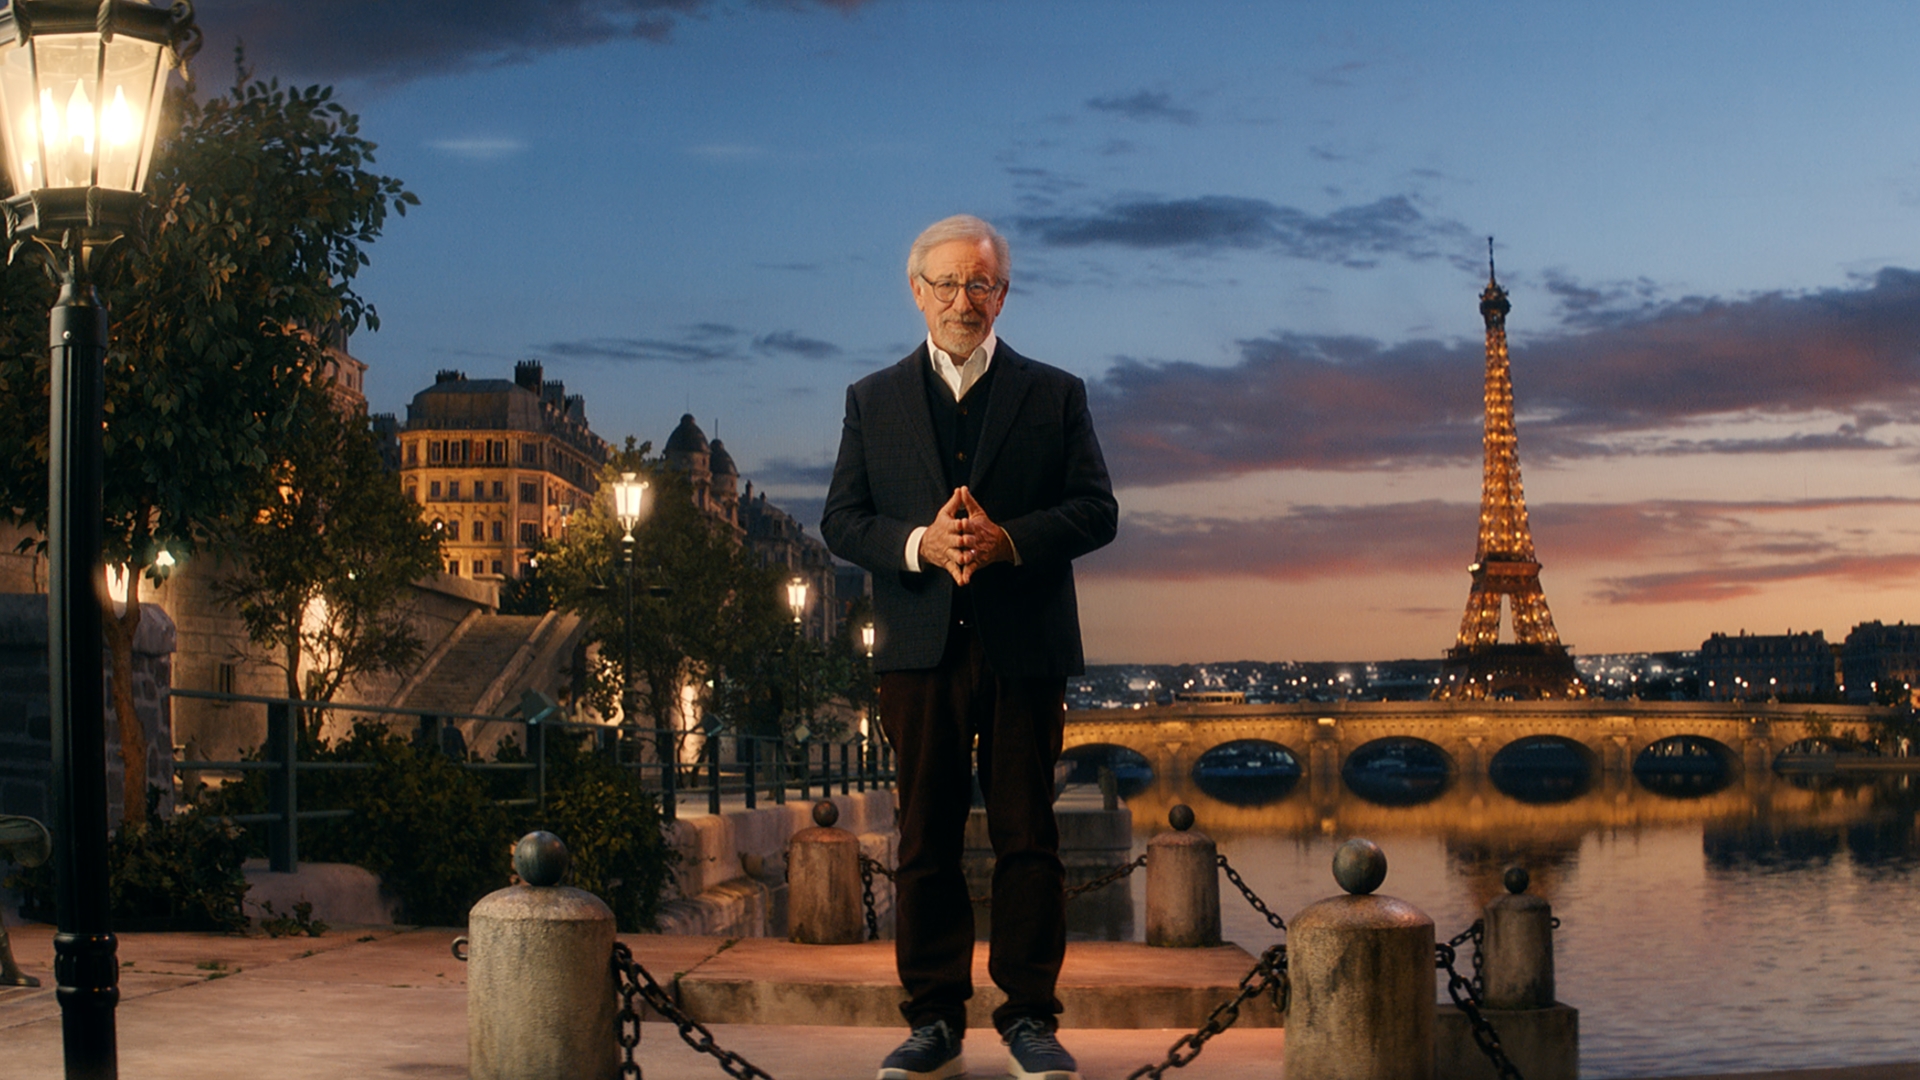 Steven Spielberg Welcomes NBC Viewers to 2024 Paris Olympics